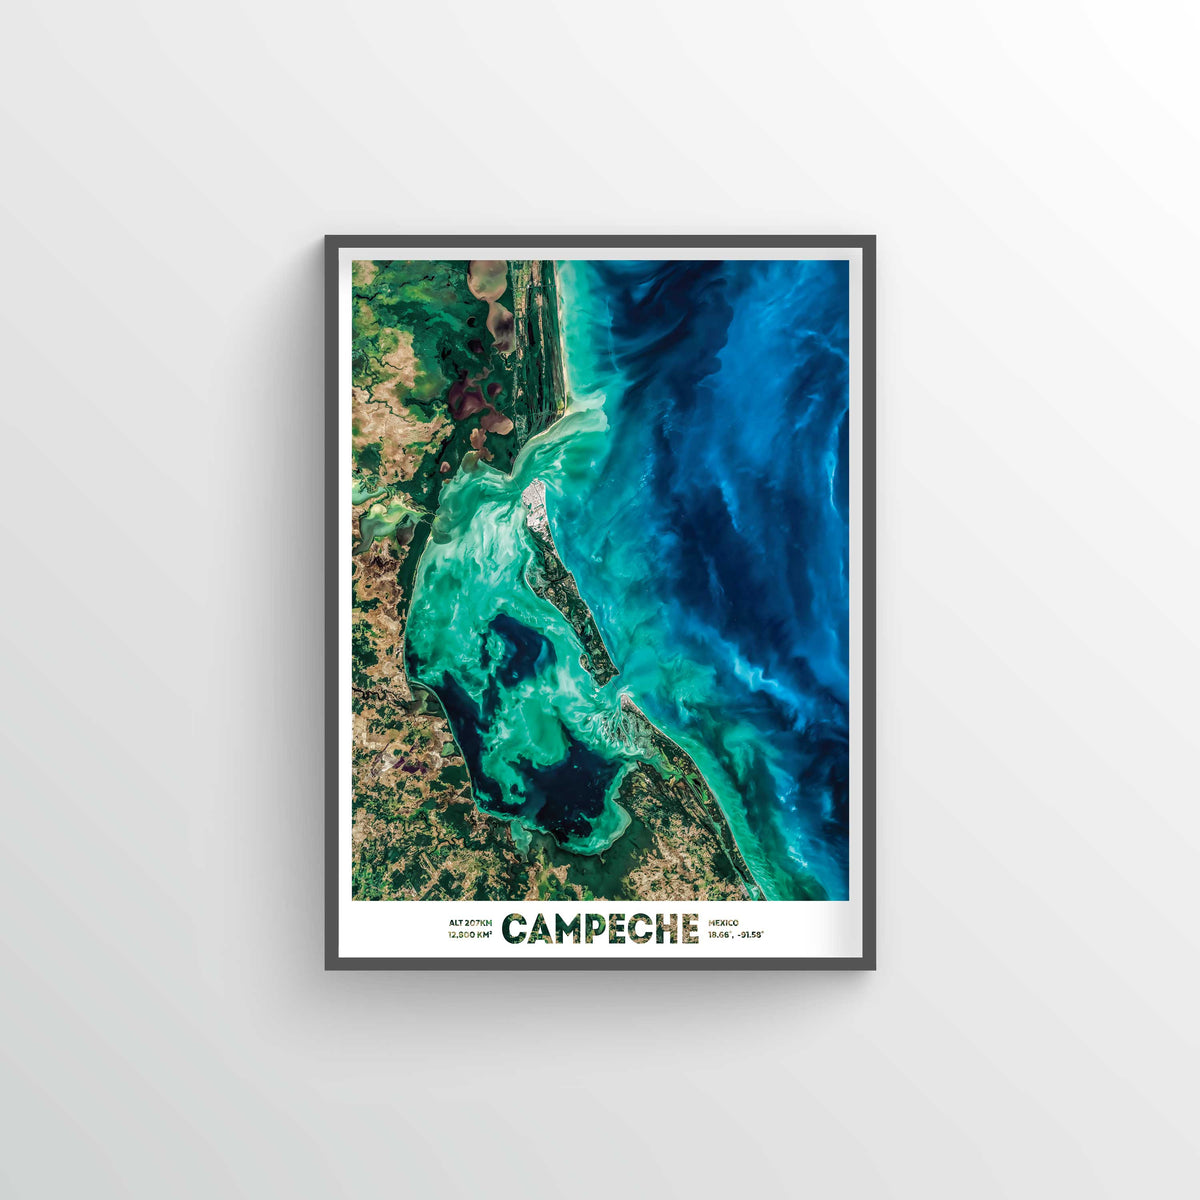 Campeche Mexico Earth Photography - Art Print